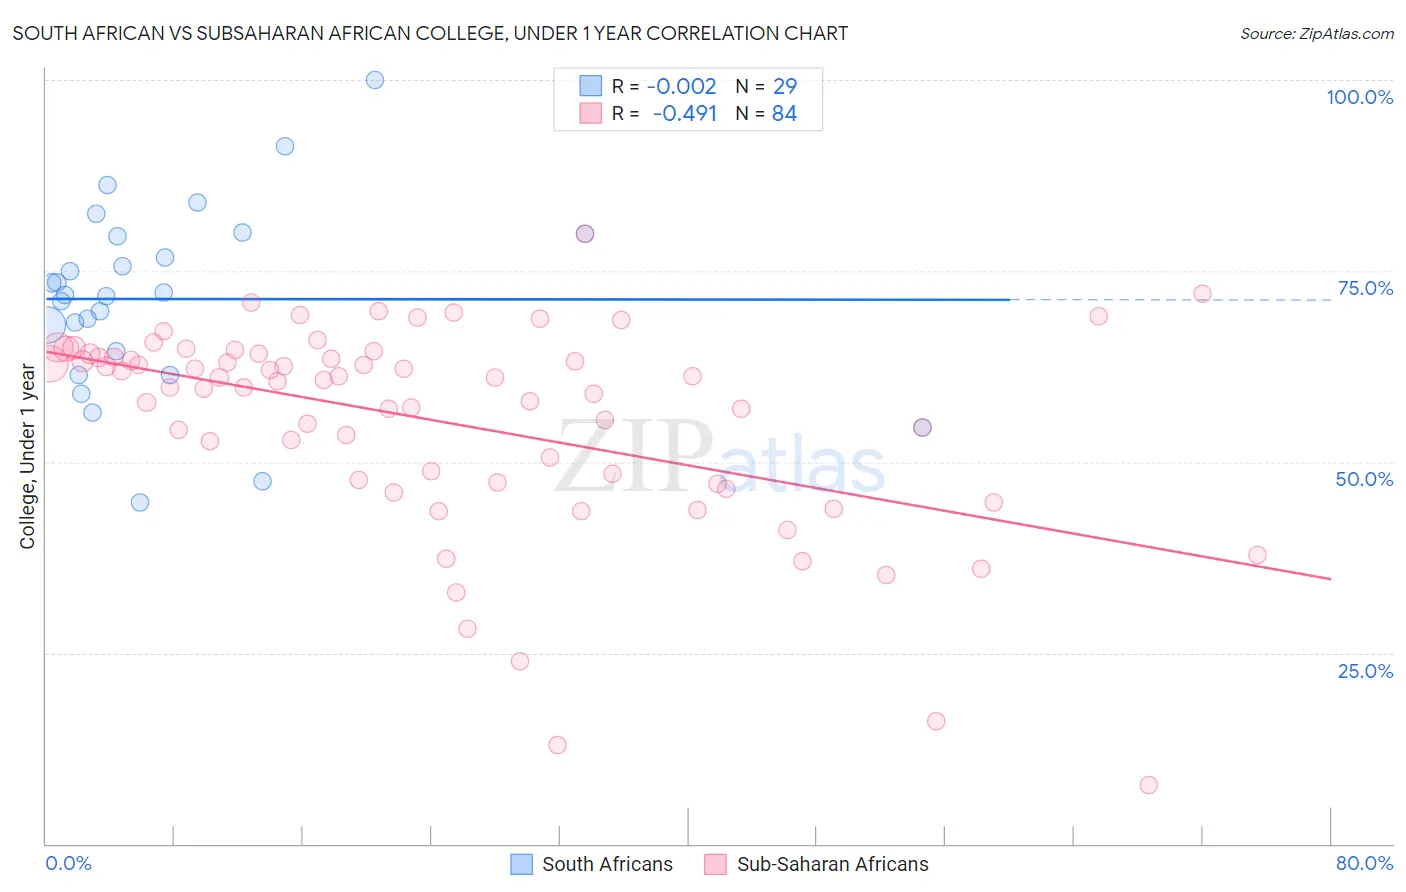 South African vs Subsaharan African College, Under 1 year